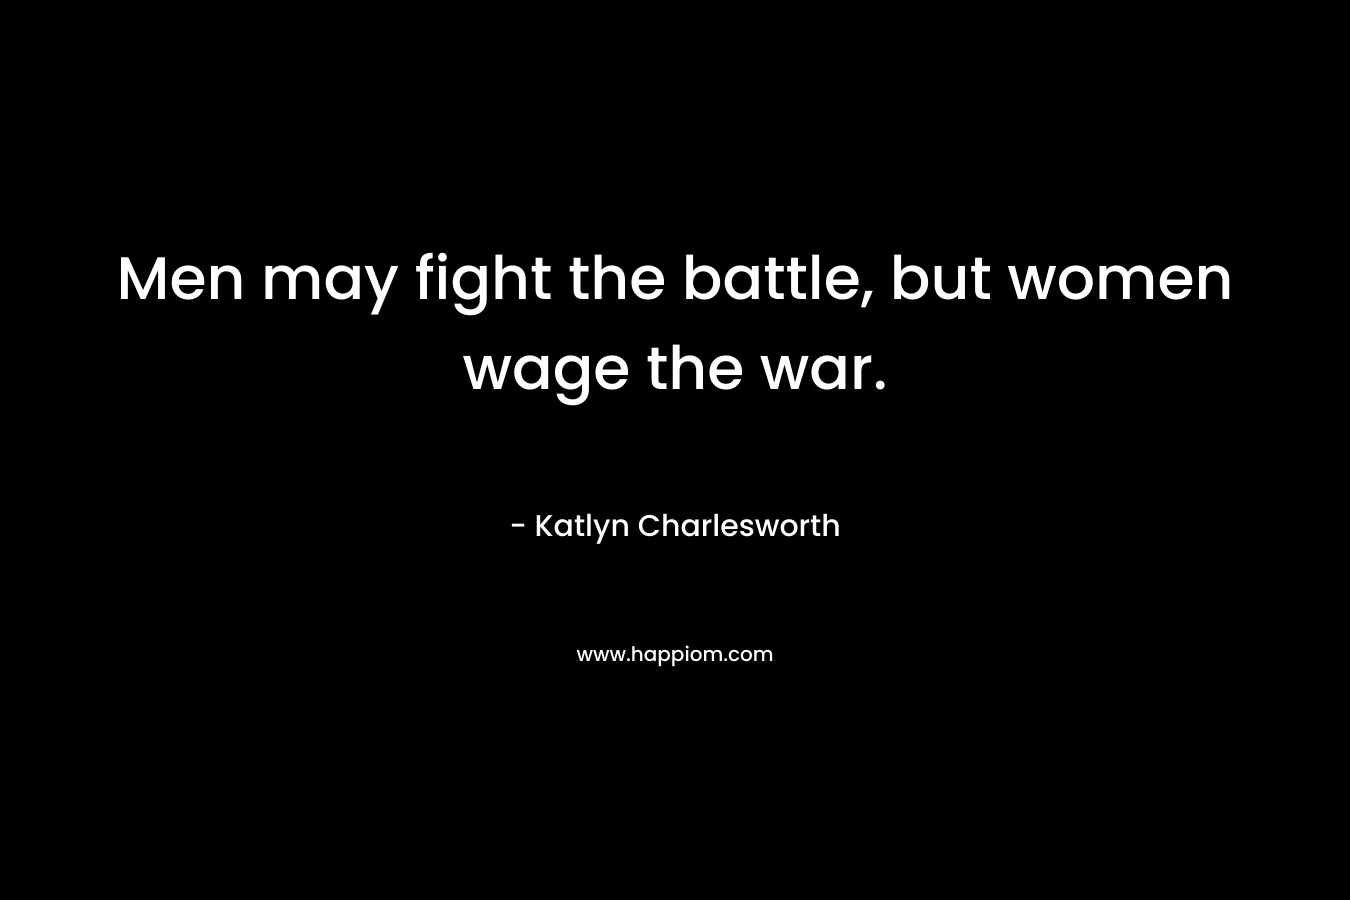 Men may fight the battle, but women wage the war. – Katlyn Charlesworth